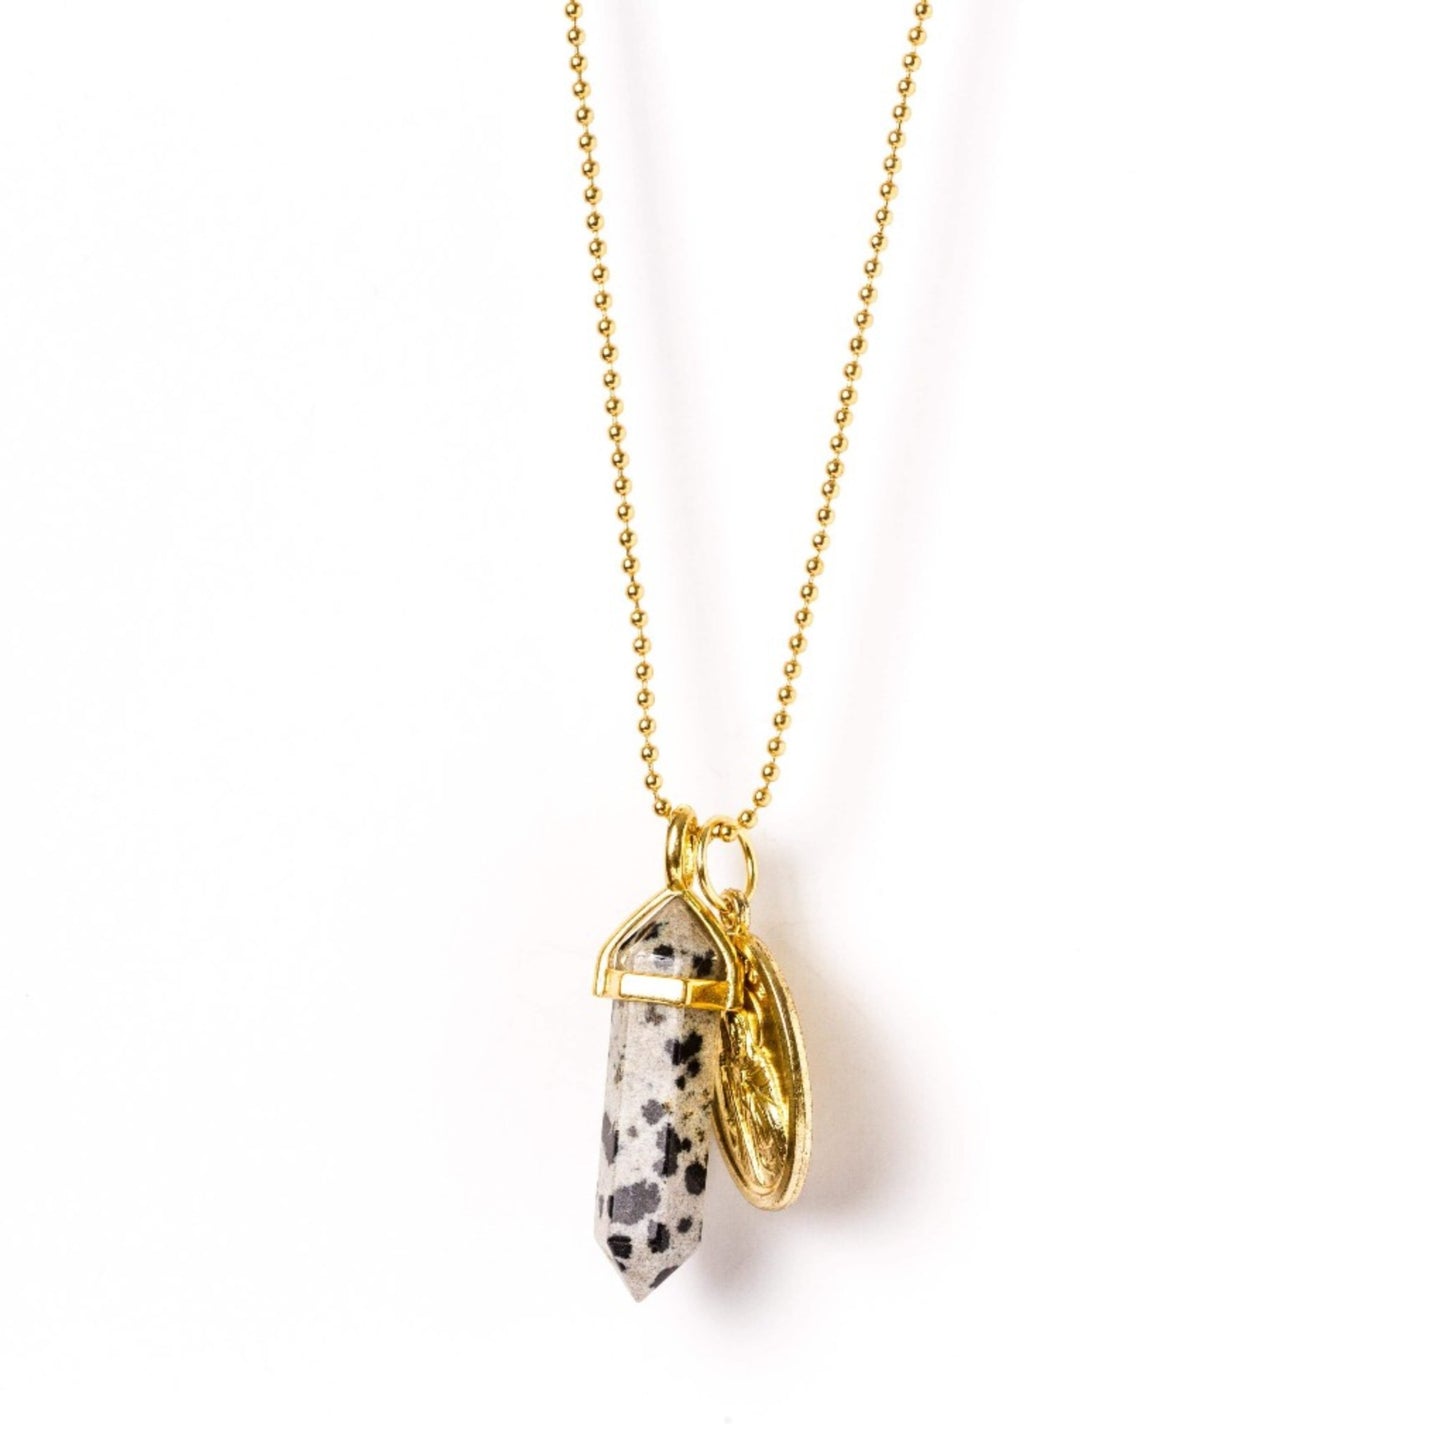 crystal-jewellery-for-gifts PENDANT NECKLACE GOLD | DALMATIAN JASPER